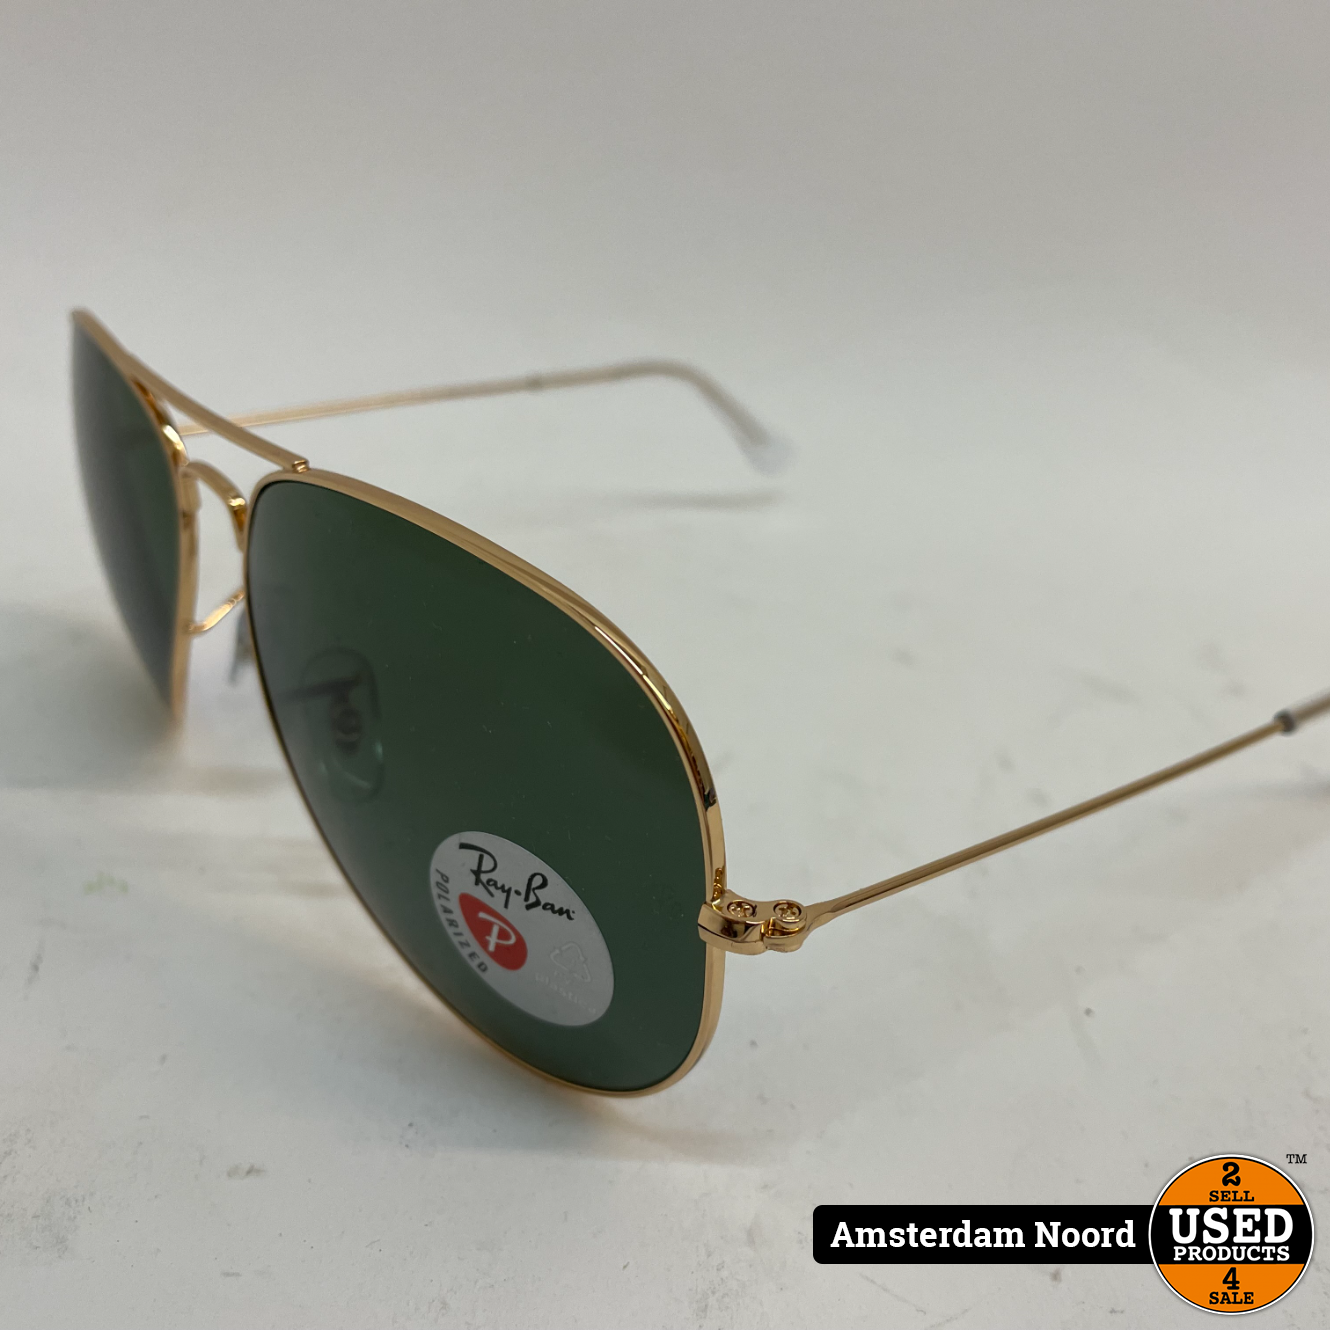 Polarized Aviator Metal Maat: 62x14 - Used Products Amsterdam Noord